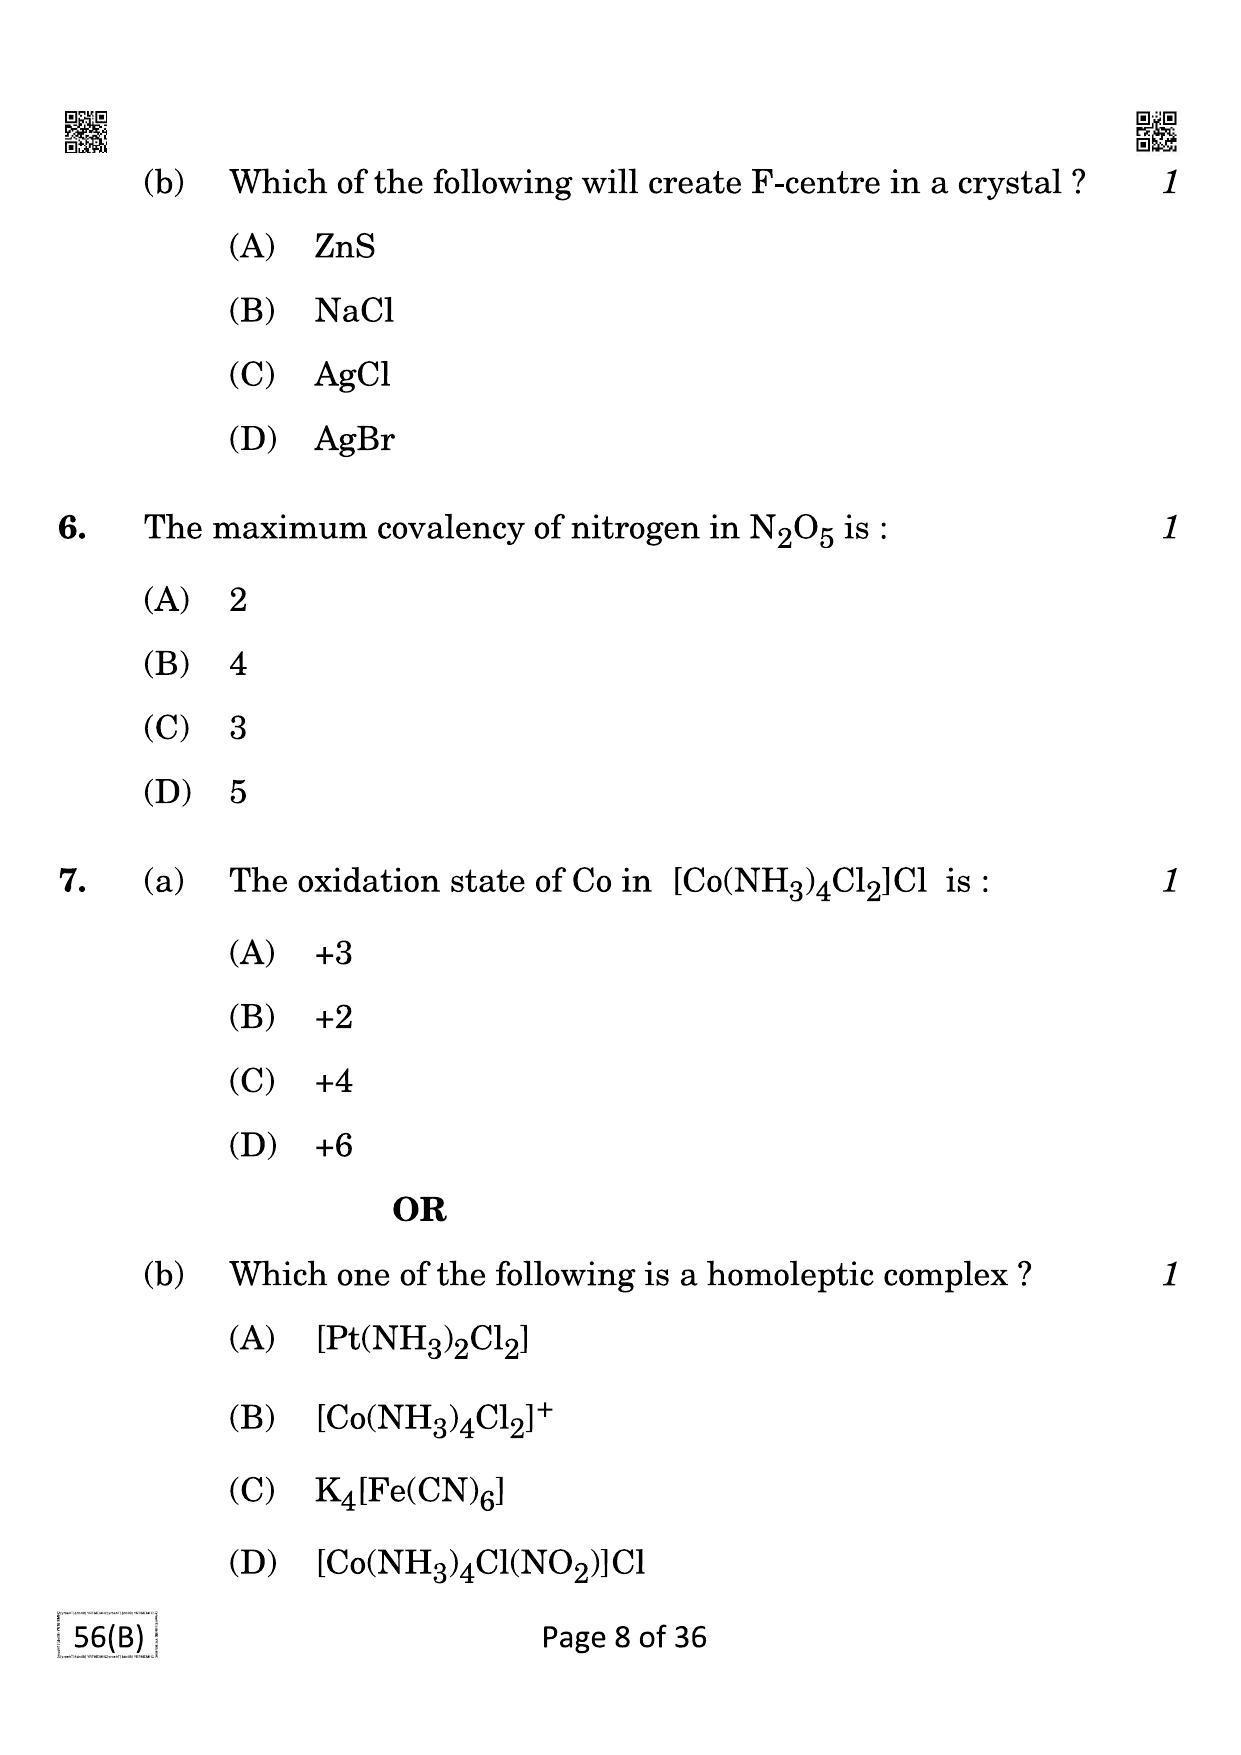 CBSE Class 12 QP_043_CHEMISTRY_FOR_BLIND_CANDIDATES 2021 Compartment Question Paper - Page 8